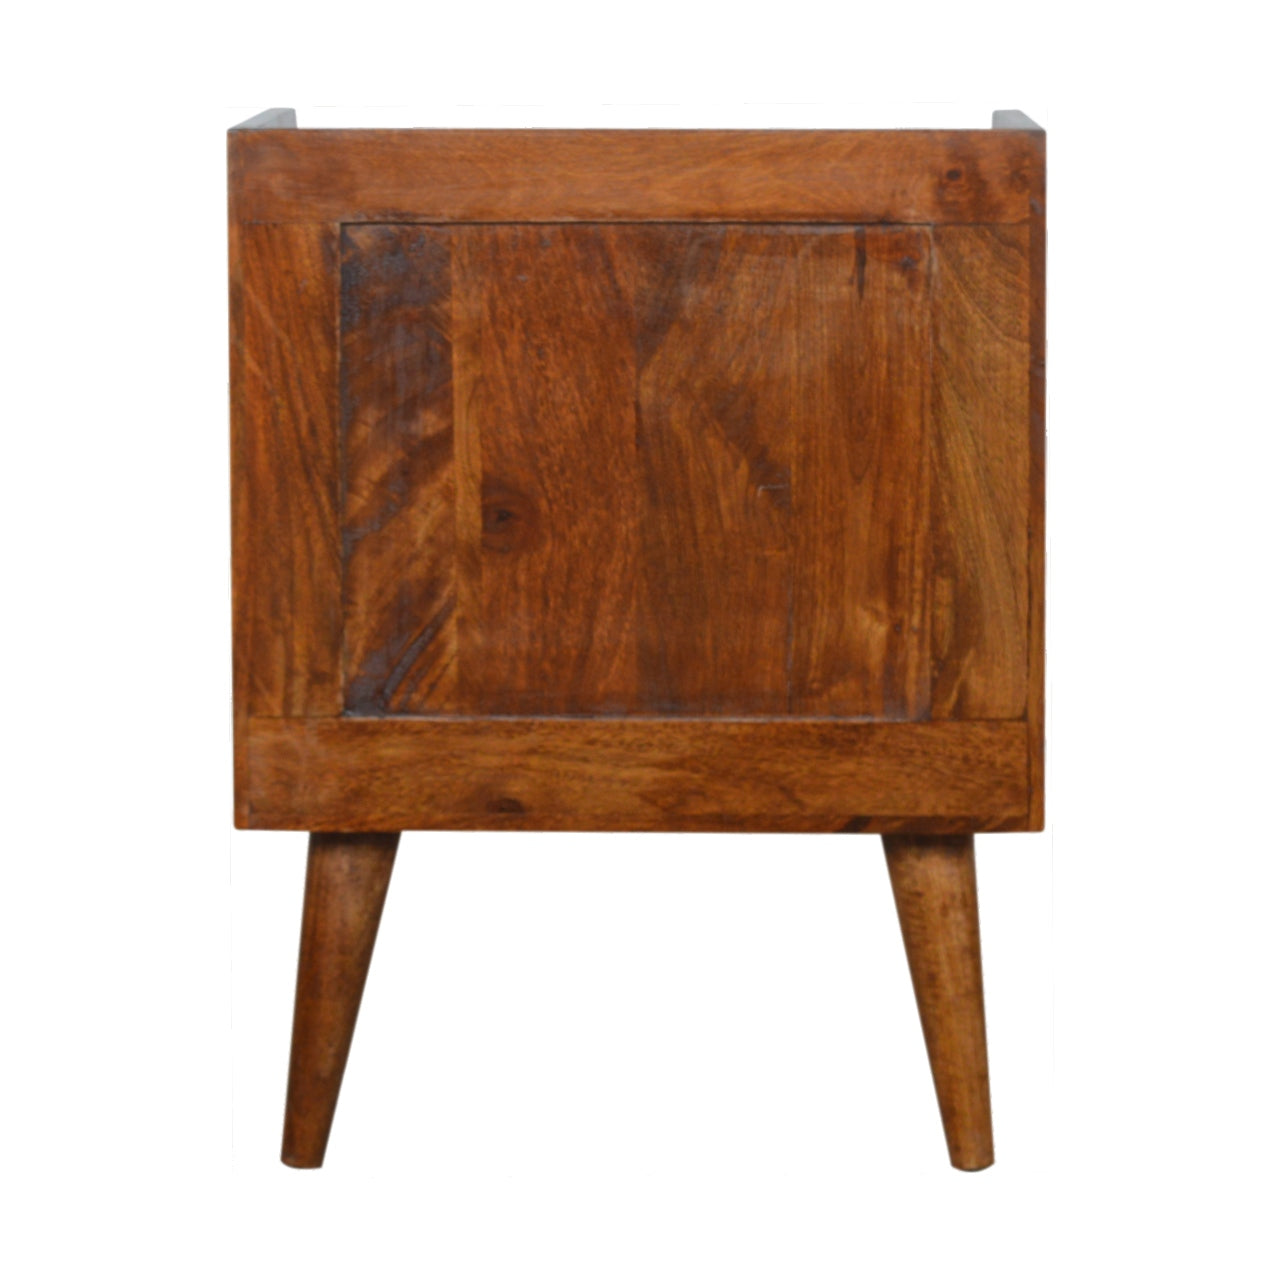 Adeline Bedside Table, Chestnut Abstract & Gold Inlay - Broxle